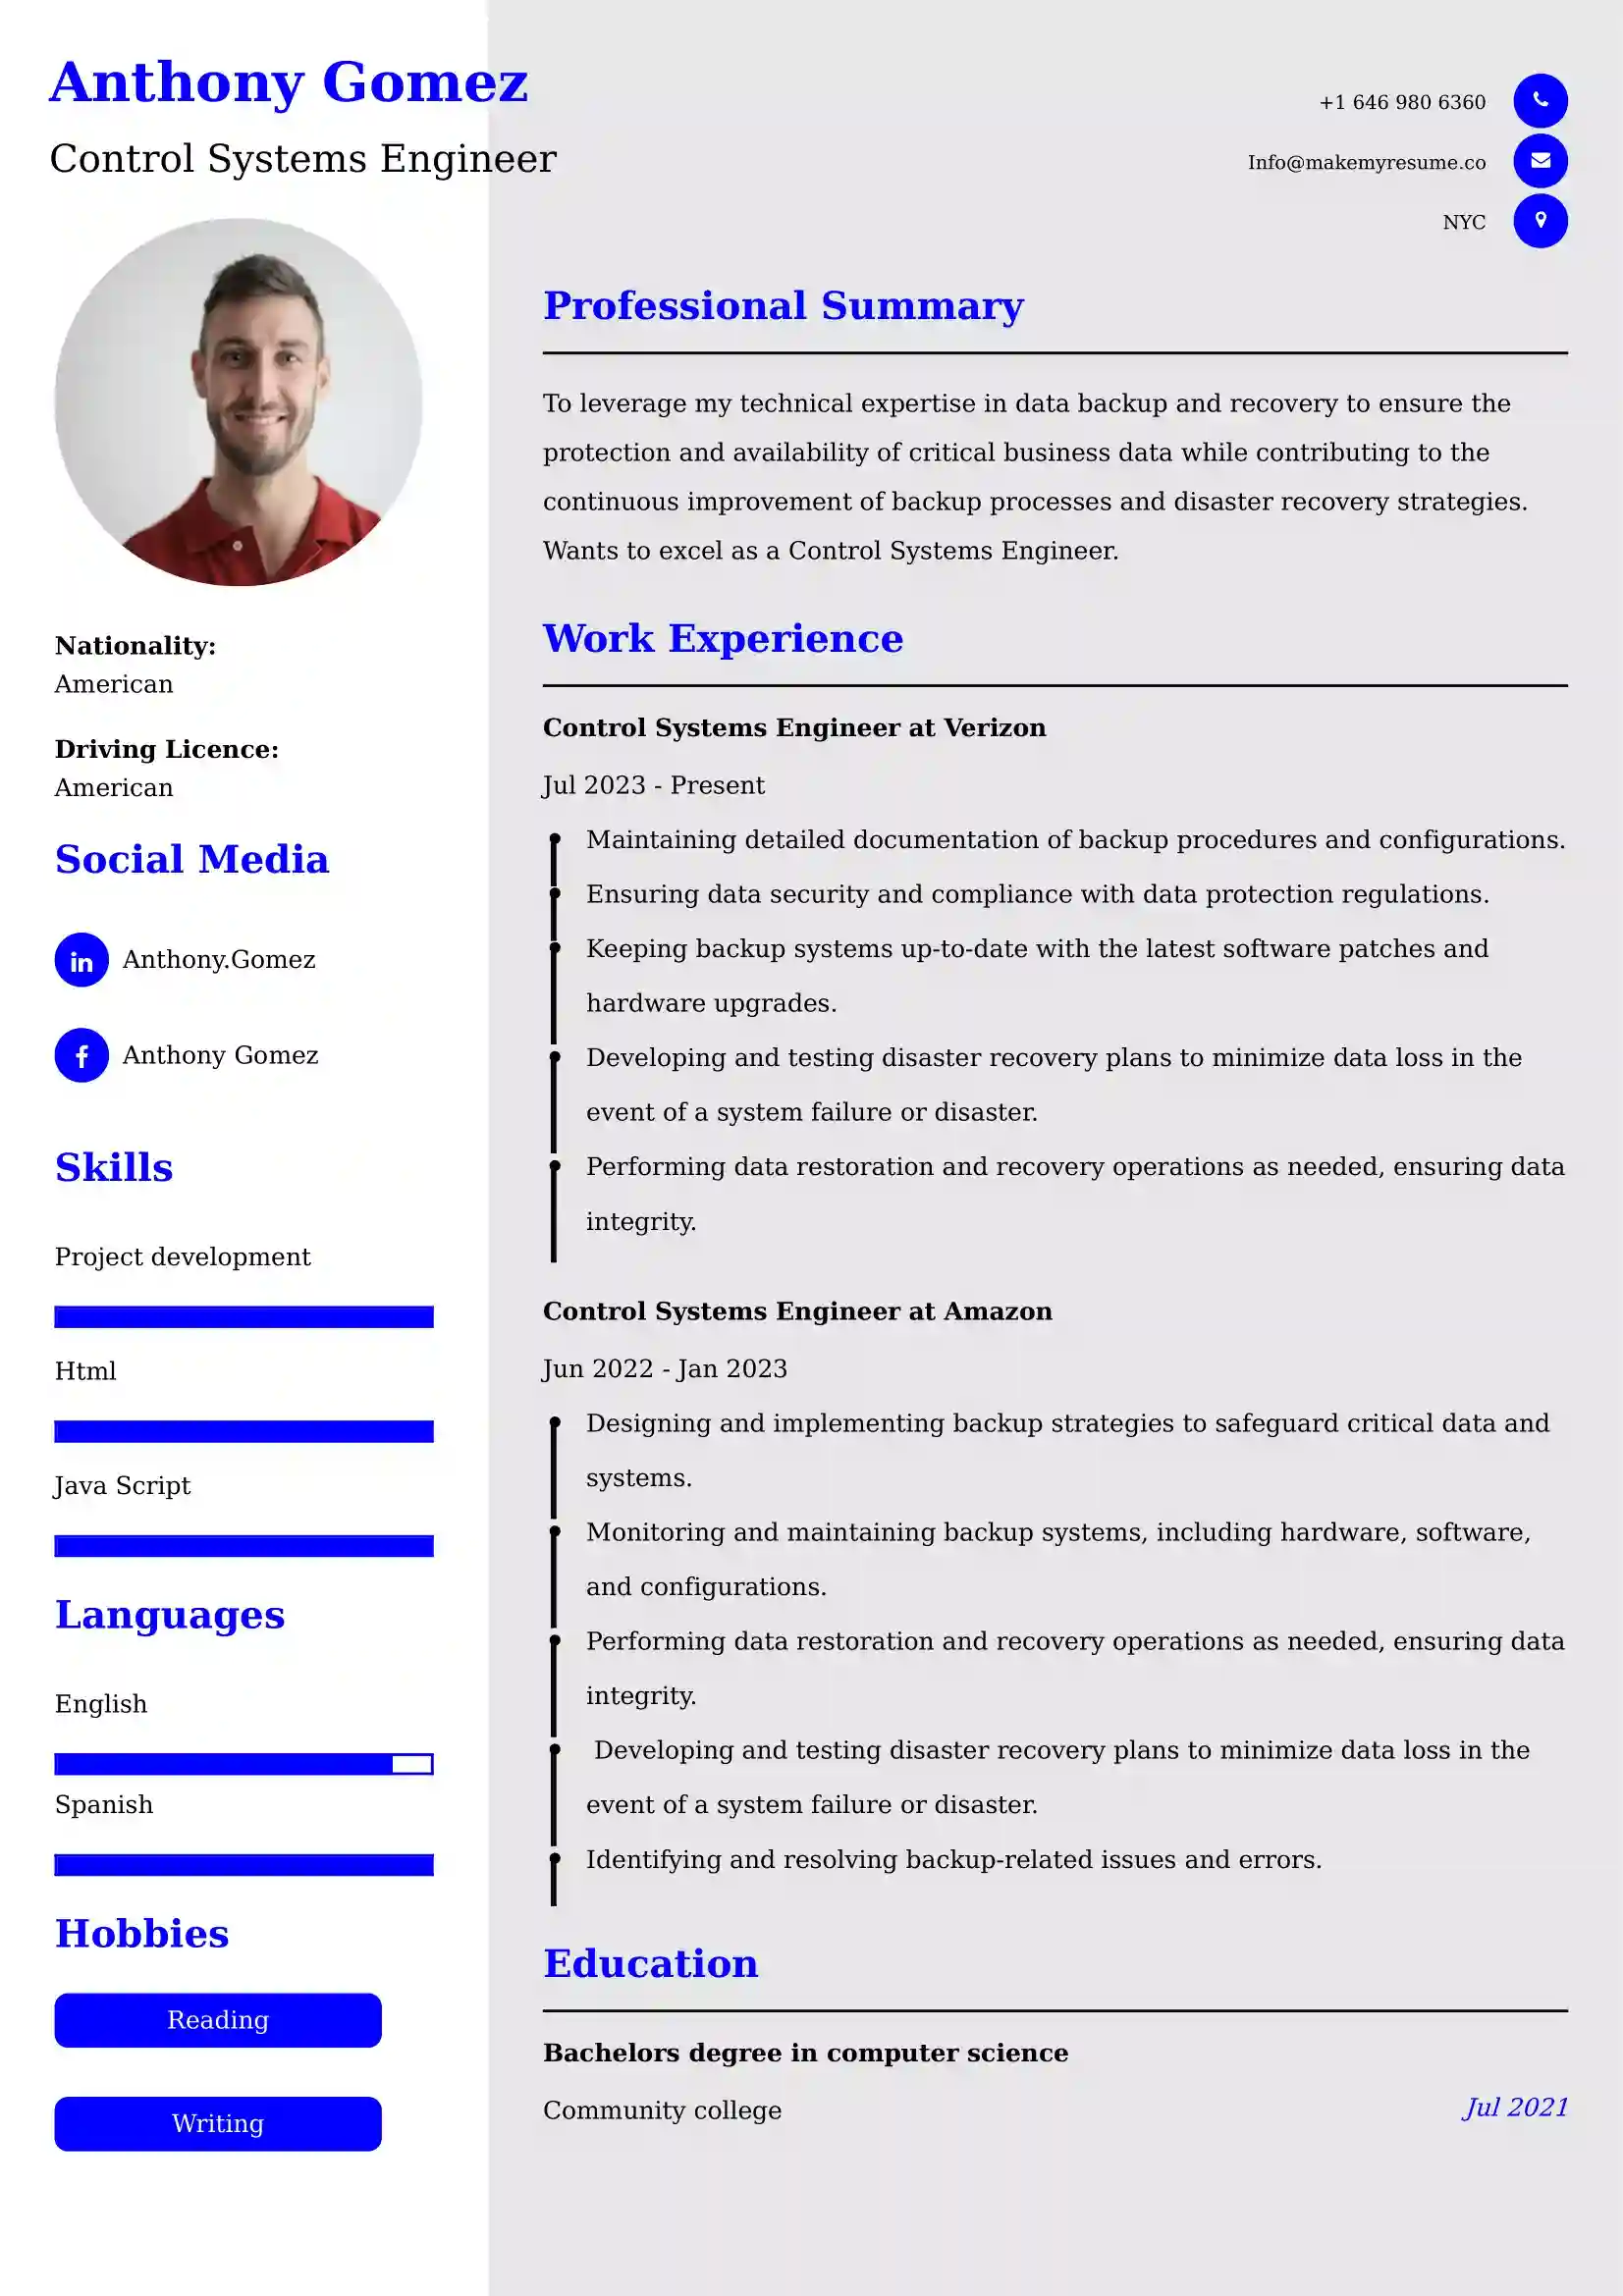 Control Systems Engineer Resume Examples - Australian Format and Tips